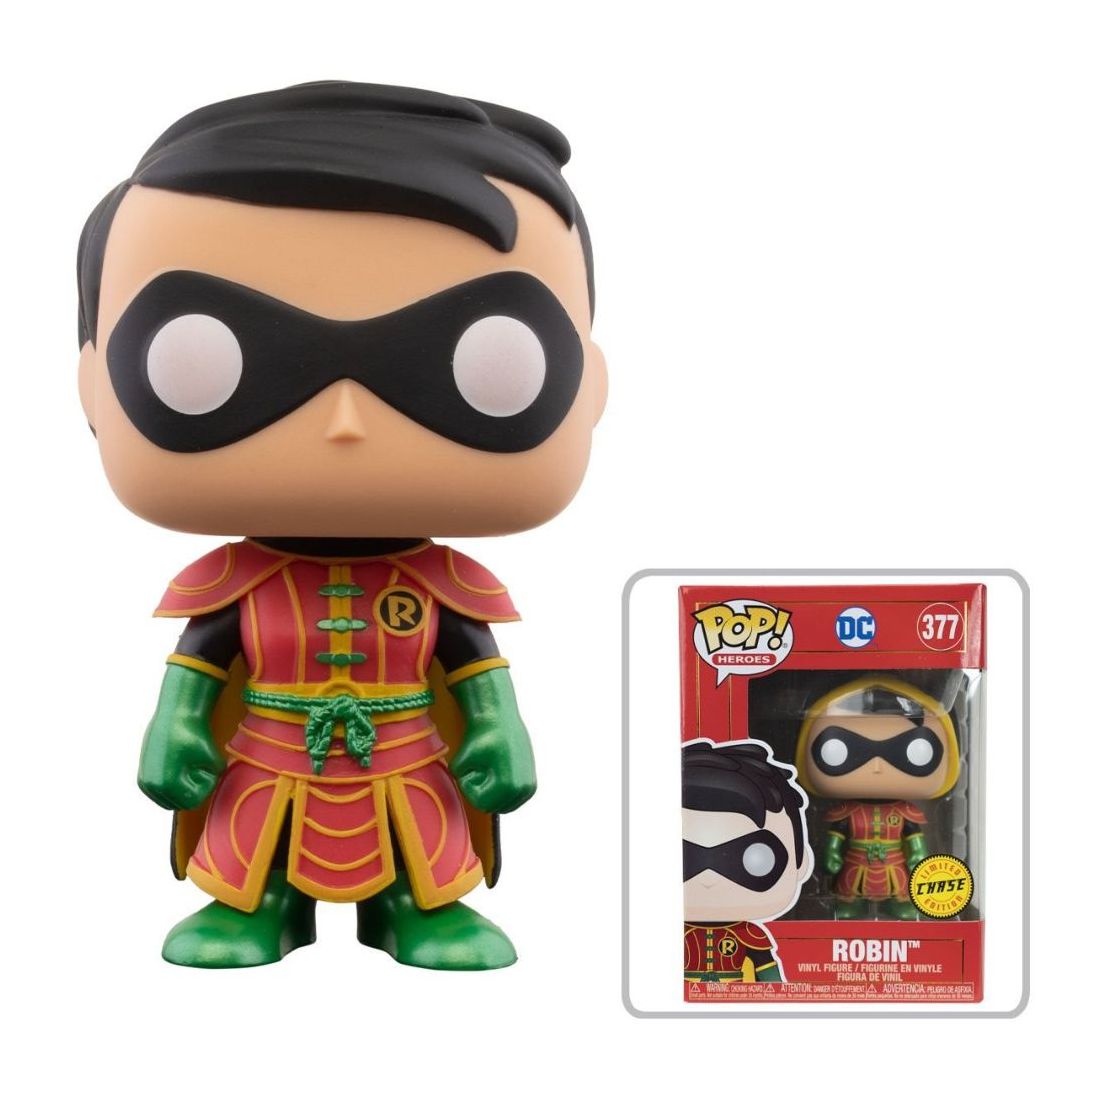 Funko Pop Heroes Imperial Palace Robin Vinyl Figure (With Chase*)